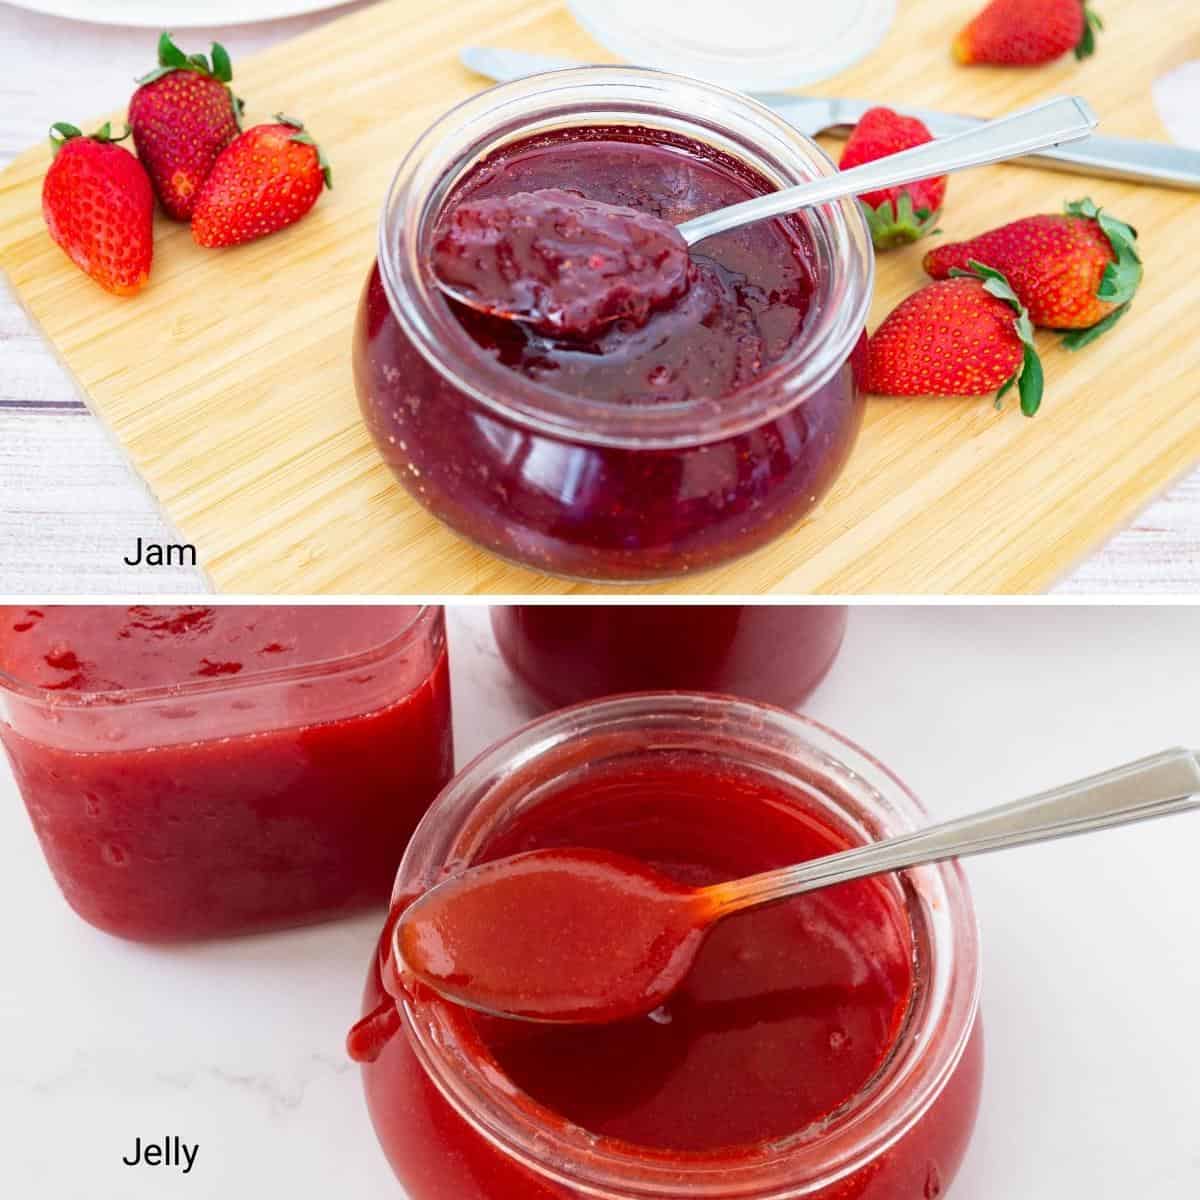 A collage showing the difference between jam and jelly.